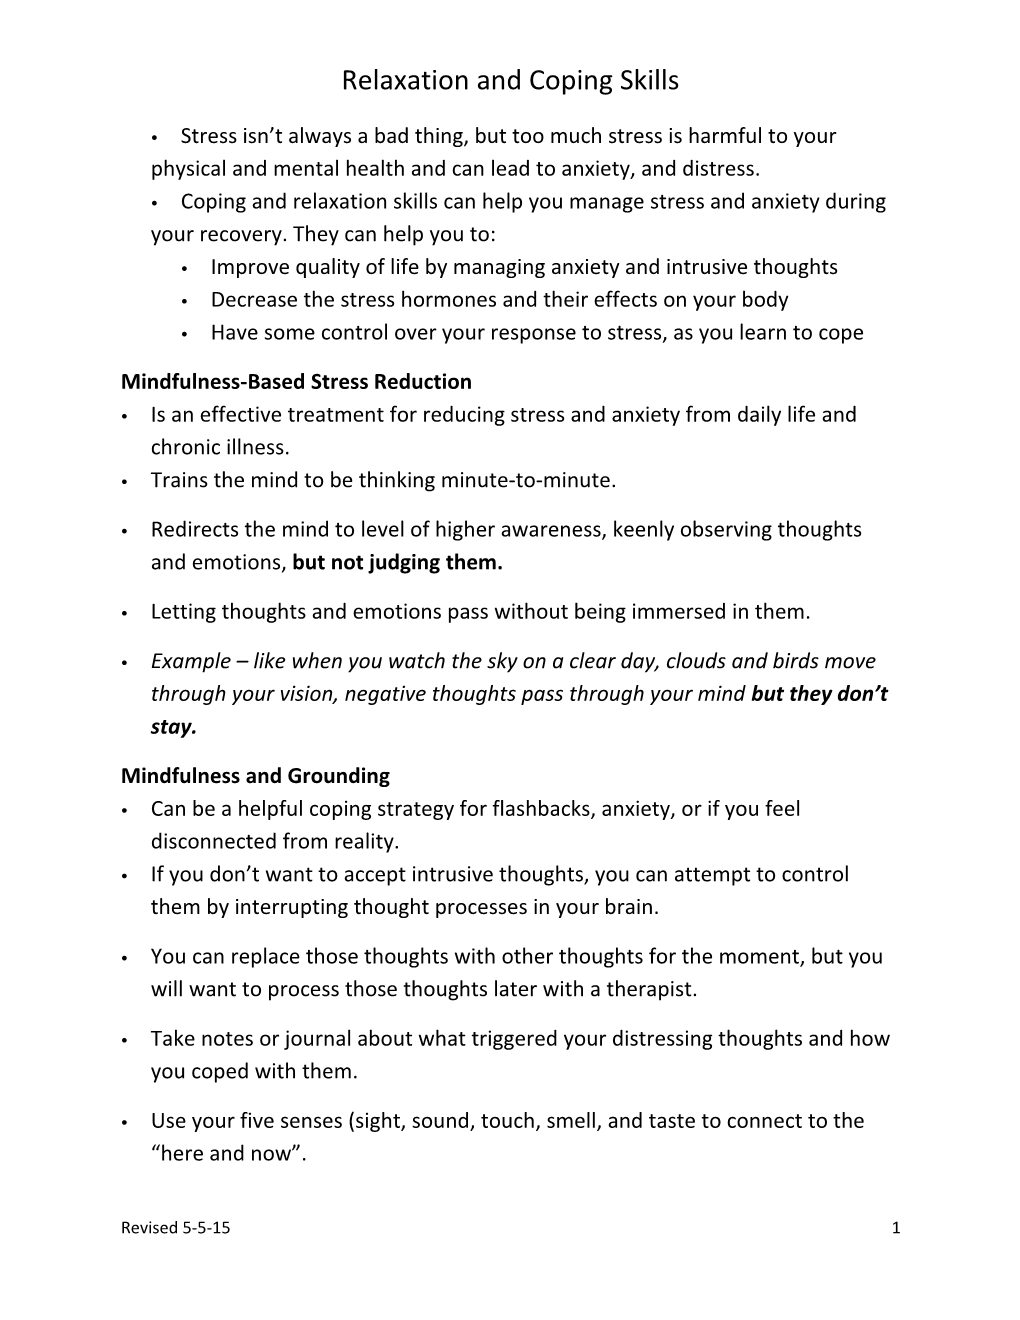 Lesson 16: Coping and Relaxation Handout